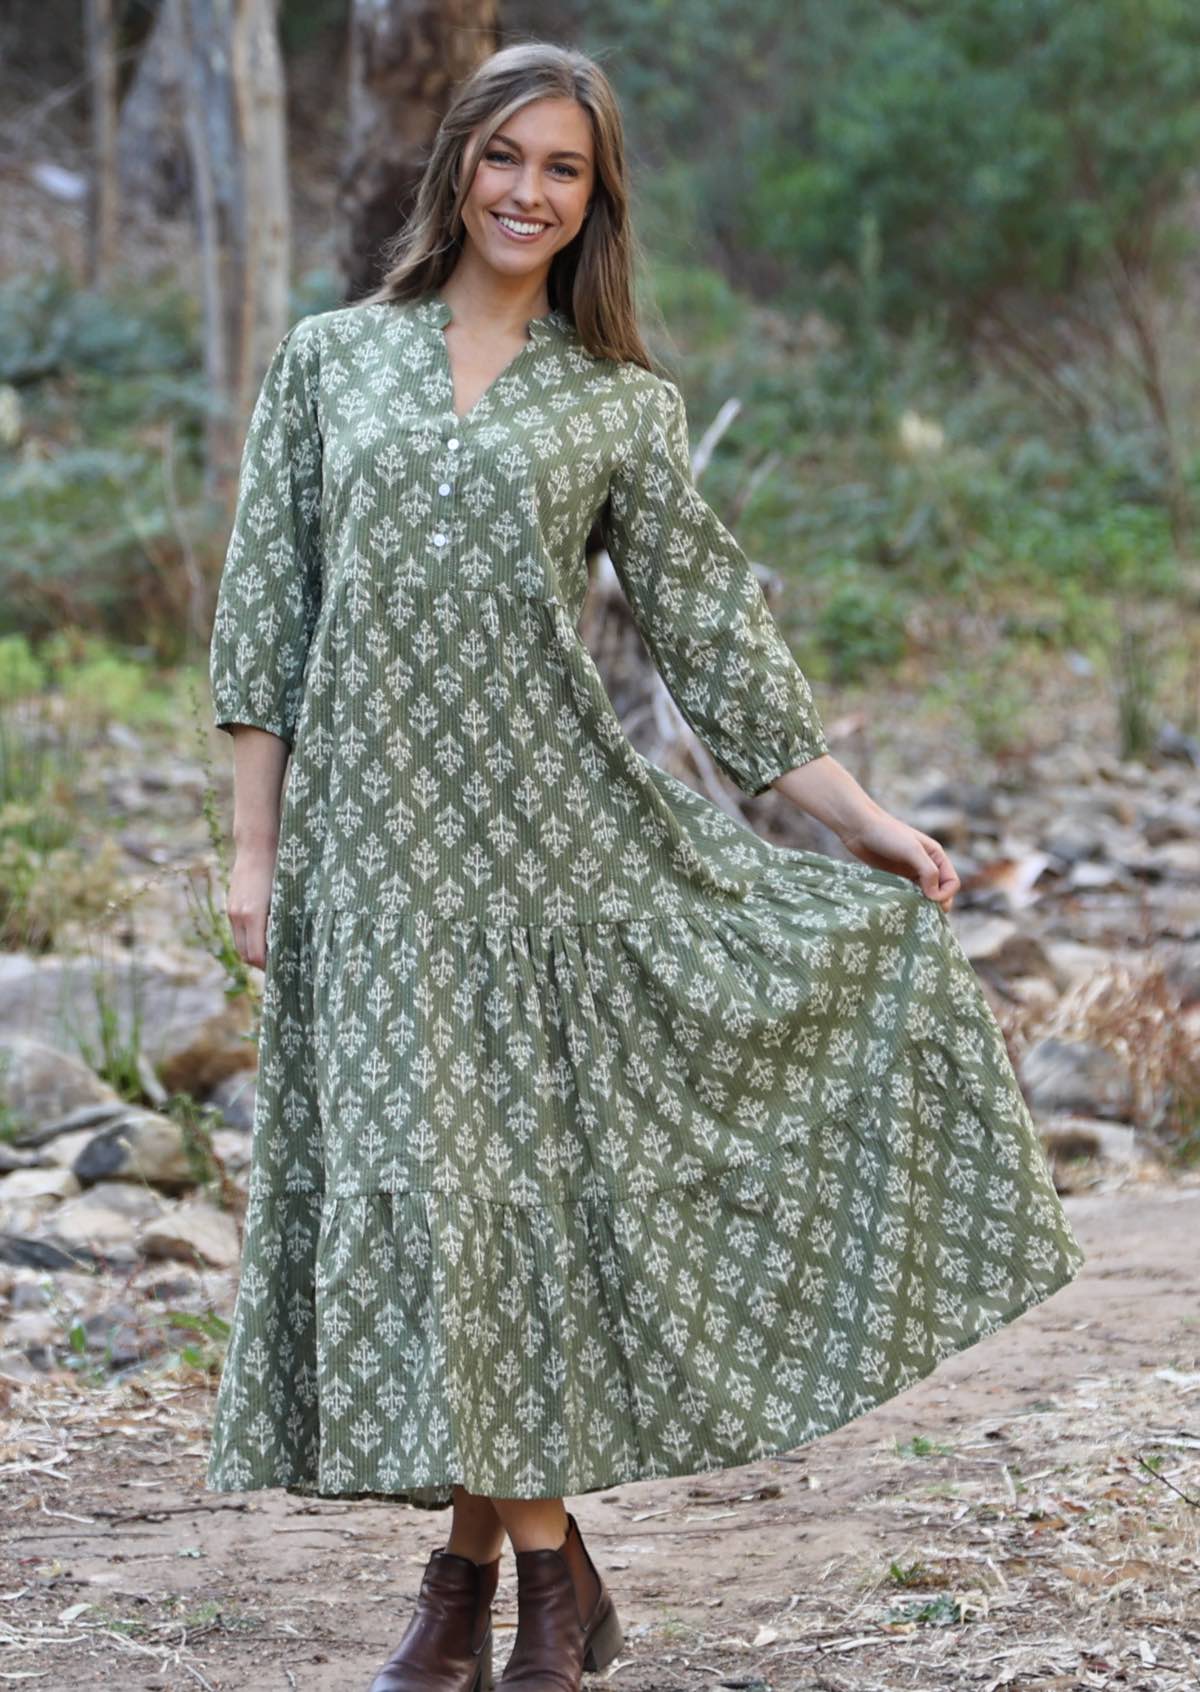 Tiered cotton maxi dress in green with flowers and kantha stitches